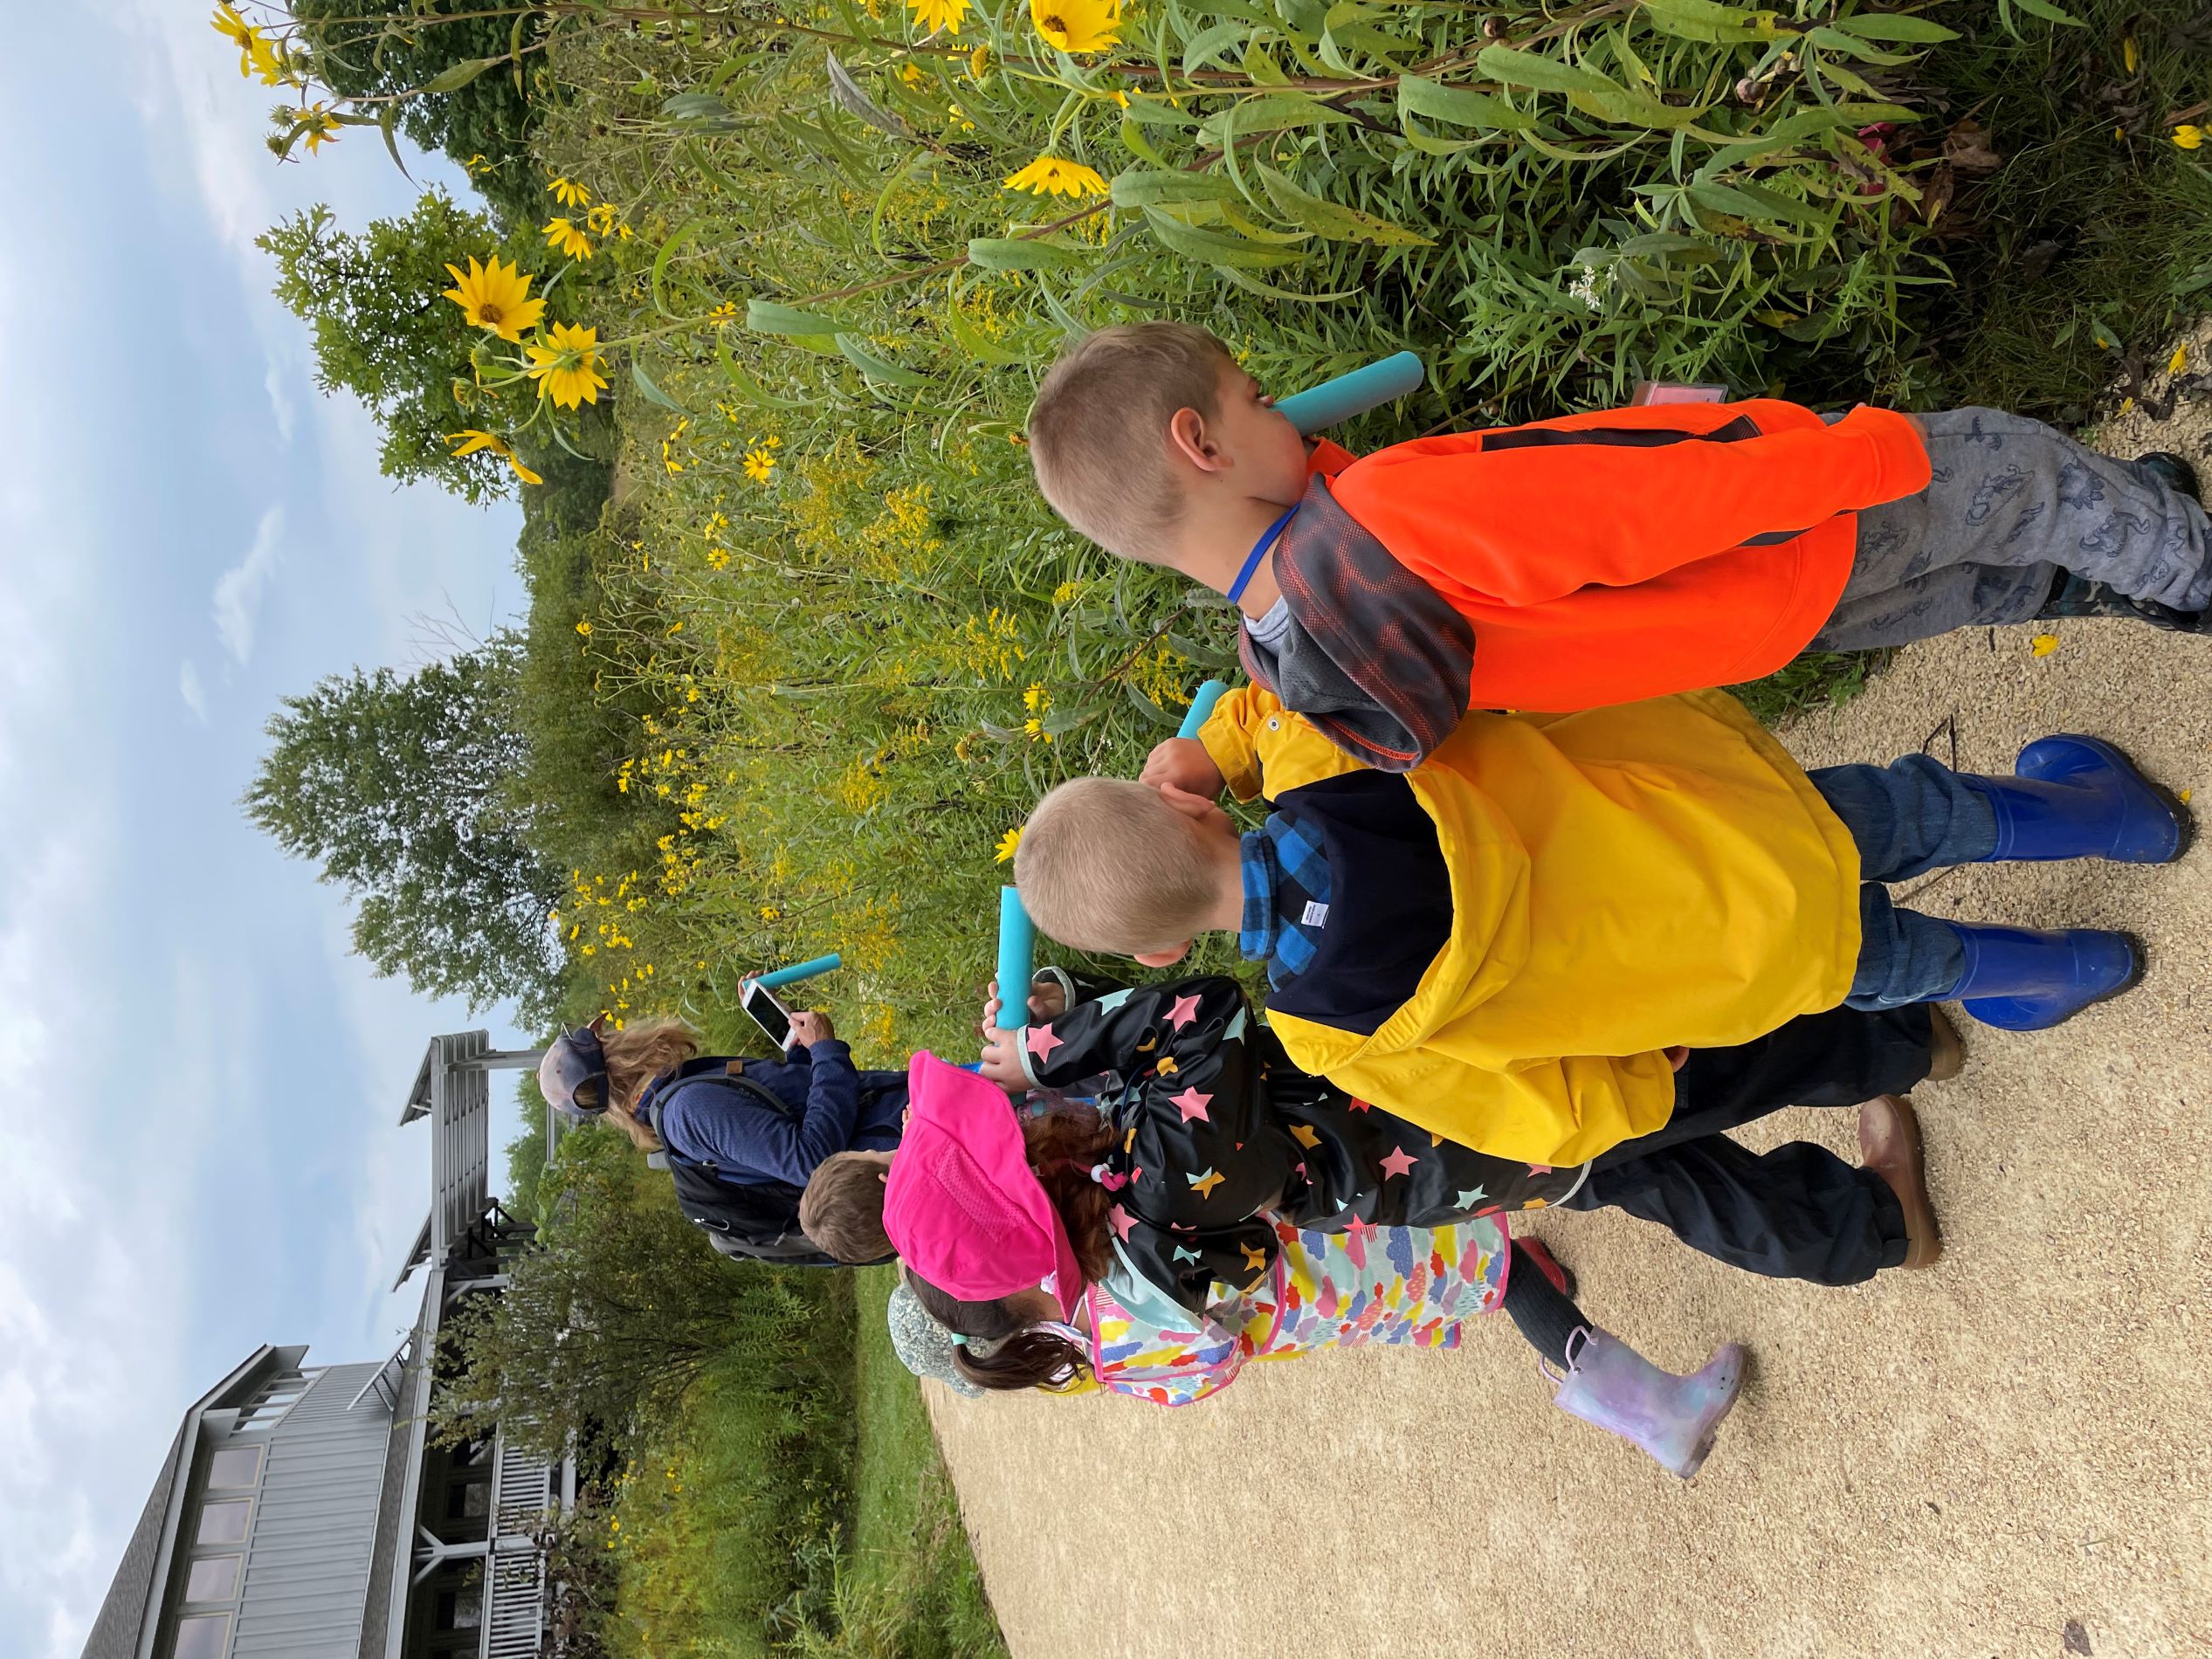 6 young kids look at fall prairie flowers at Riveredge from a trail guided by an educator